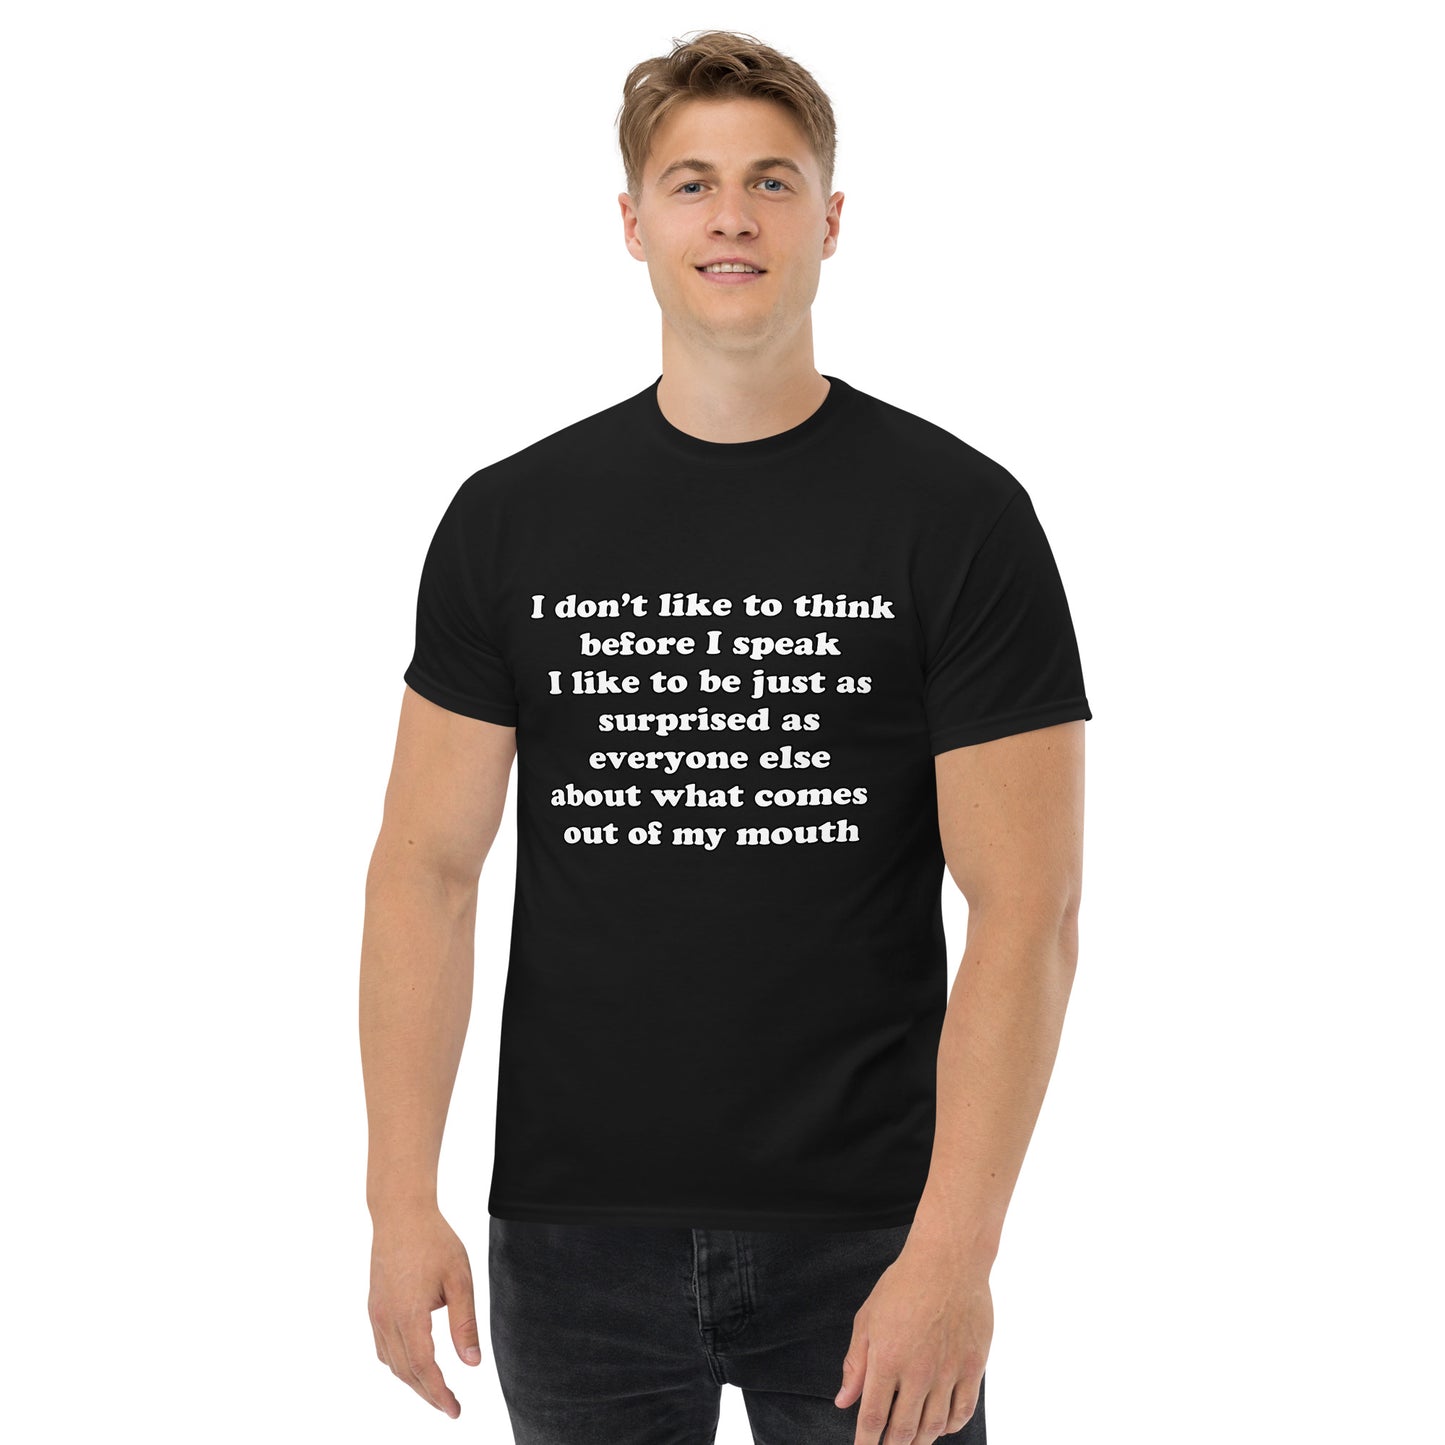 Man with black t-shirt with text “I don't think before I speak Just as serprised as everyone about what comes out of my mouth"